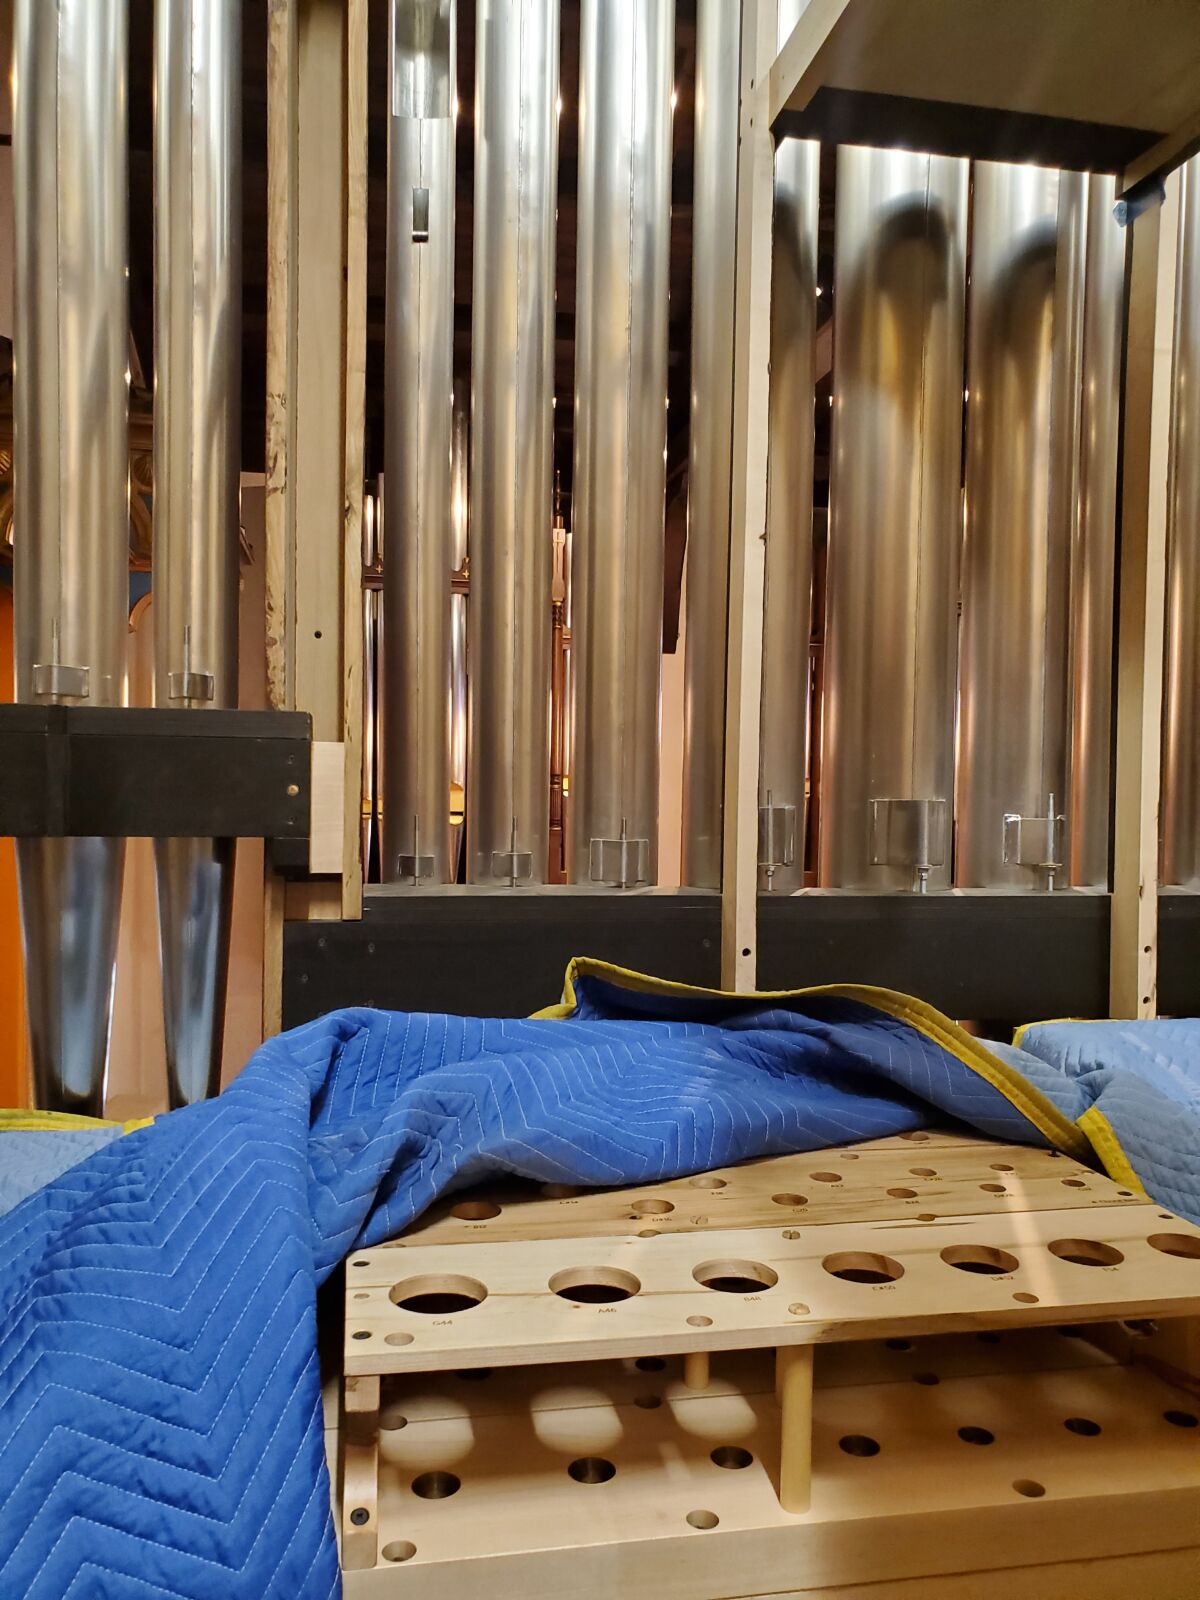 A behind-the-scenes look at the in-development pipe organ.